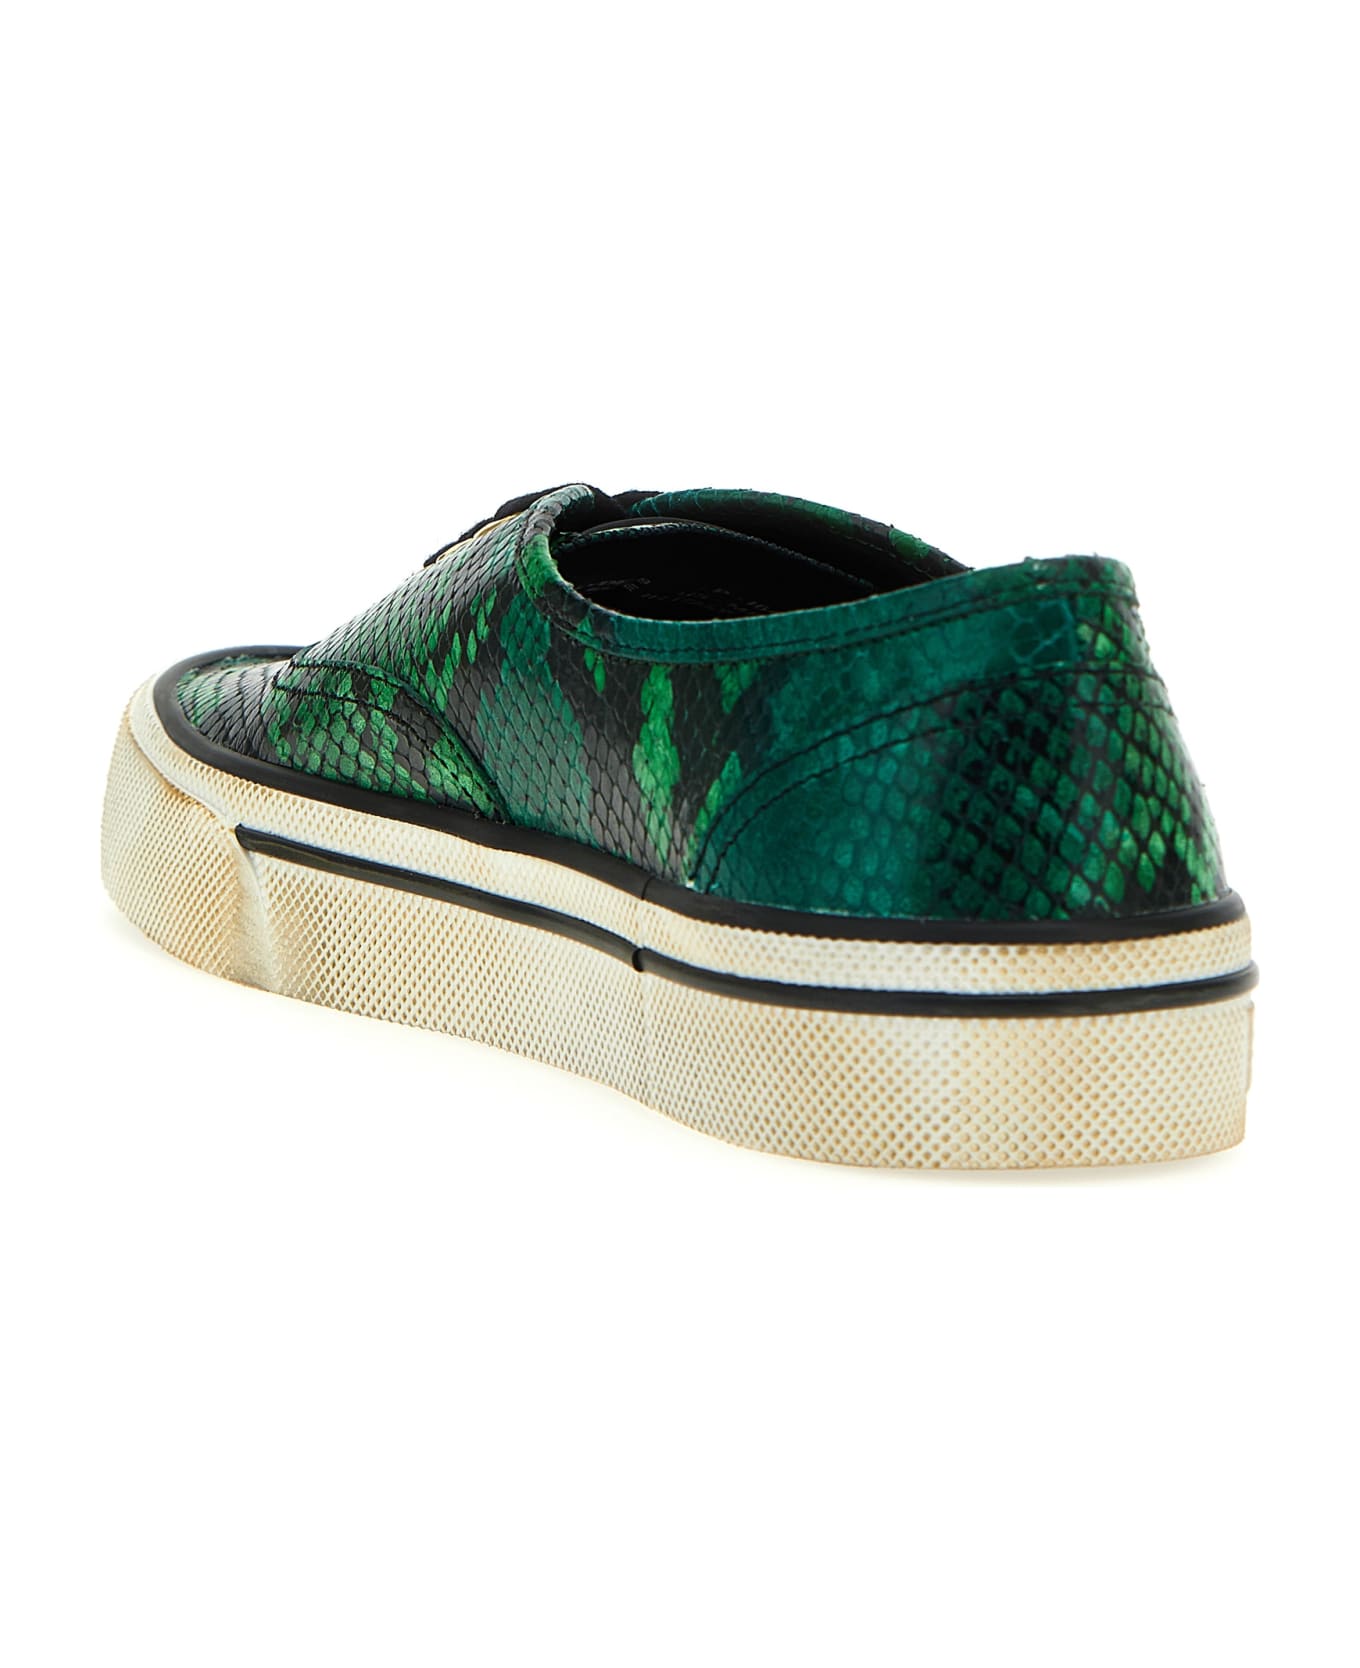 Bally 'lyder' Sneakers - Green